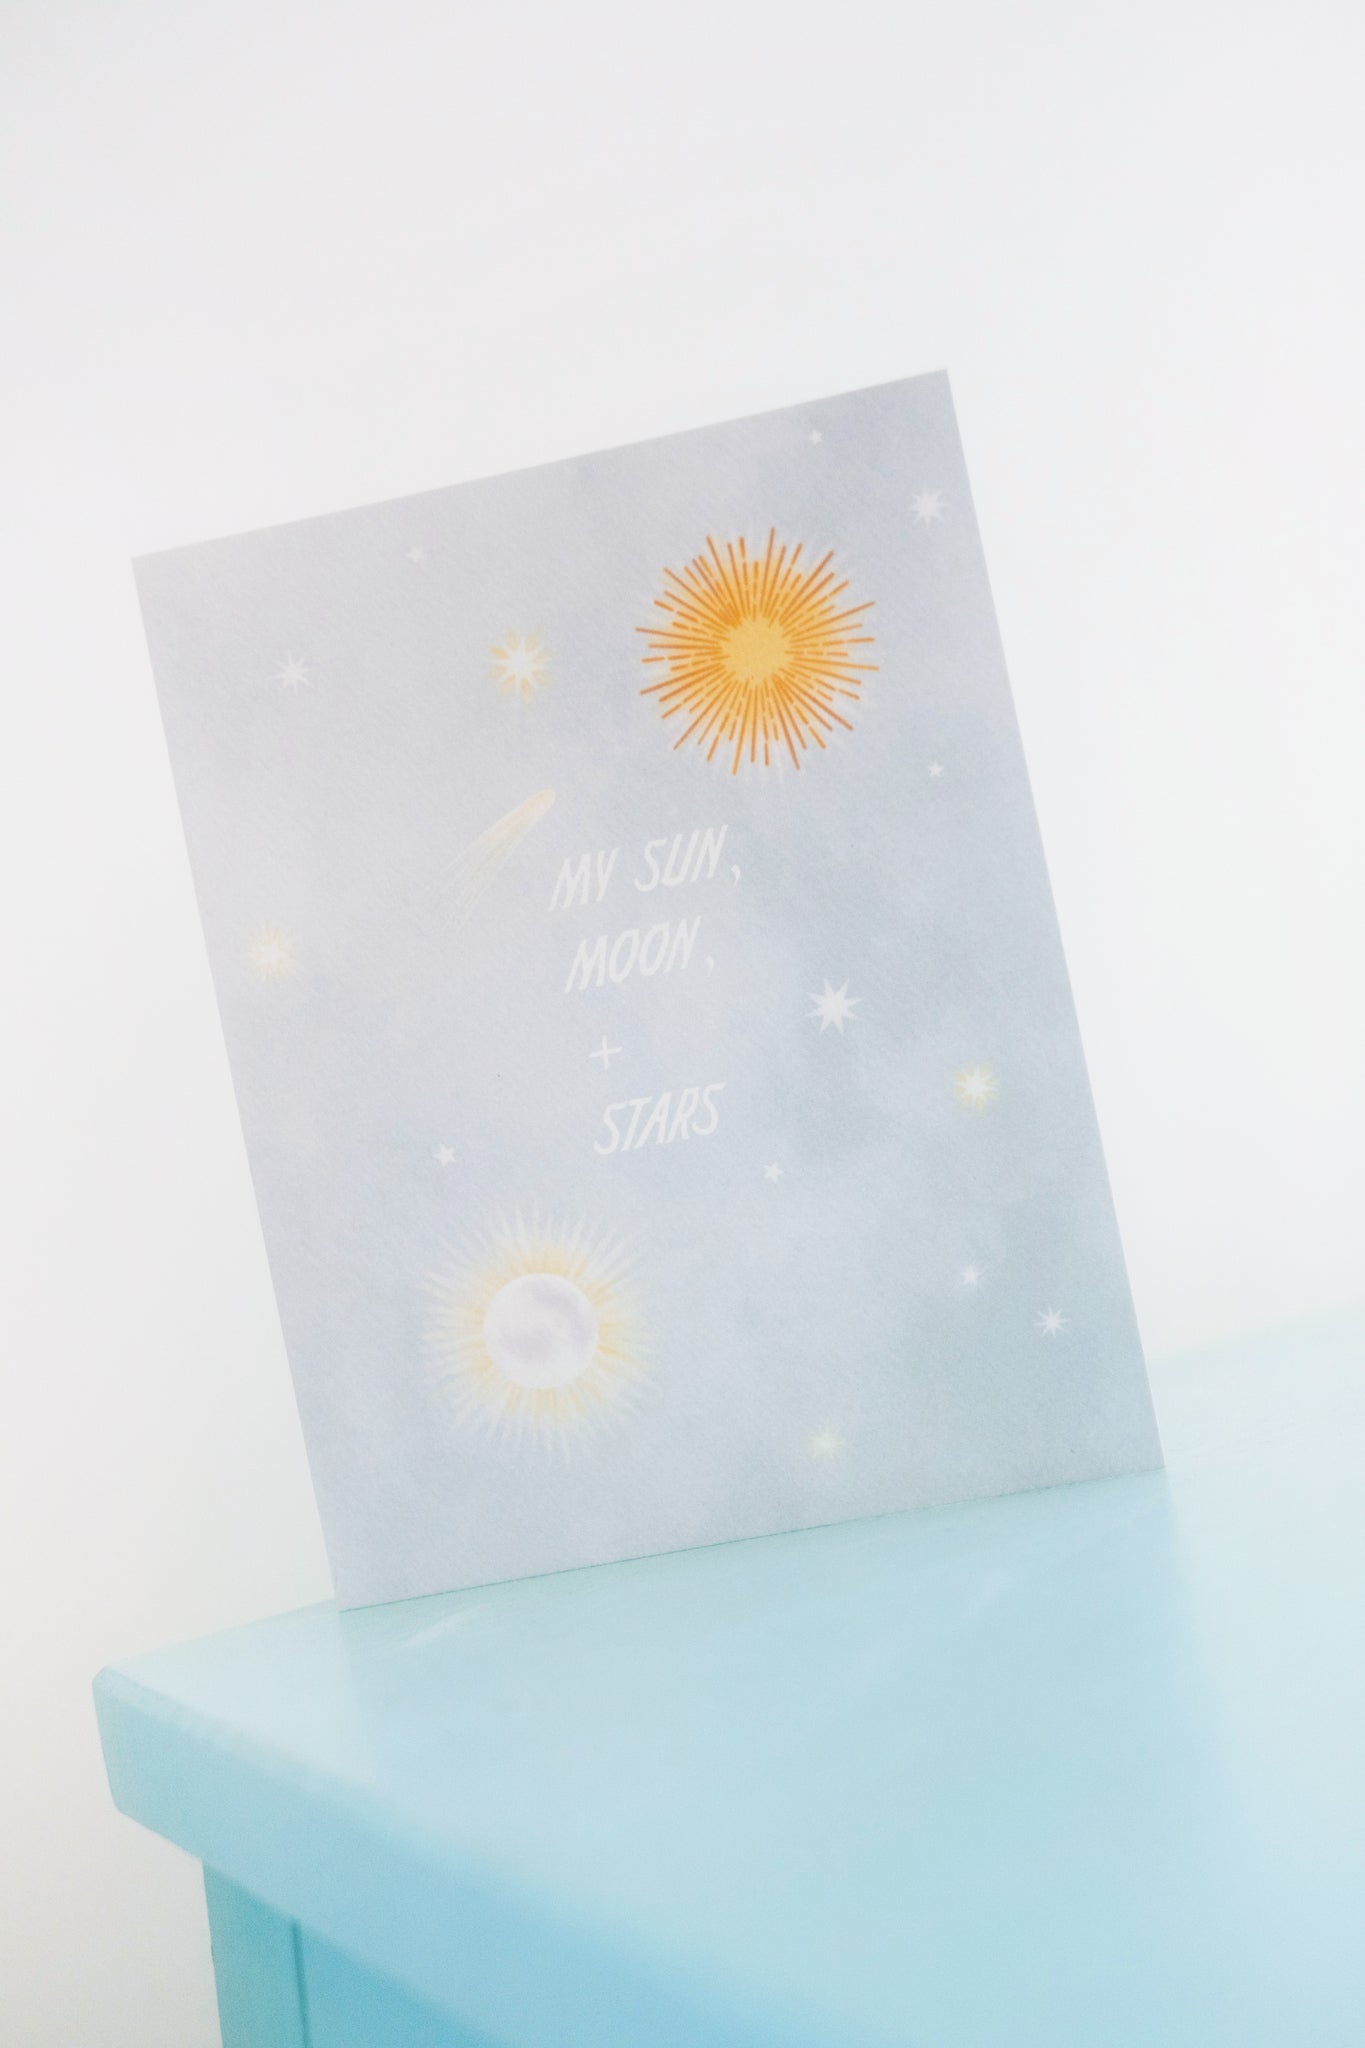 Blue sky with sun, moon, stars and text that reads "My Sun, Moon, + Stars." Shown on blue shelf with white background.